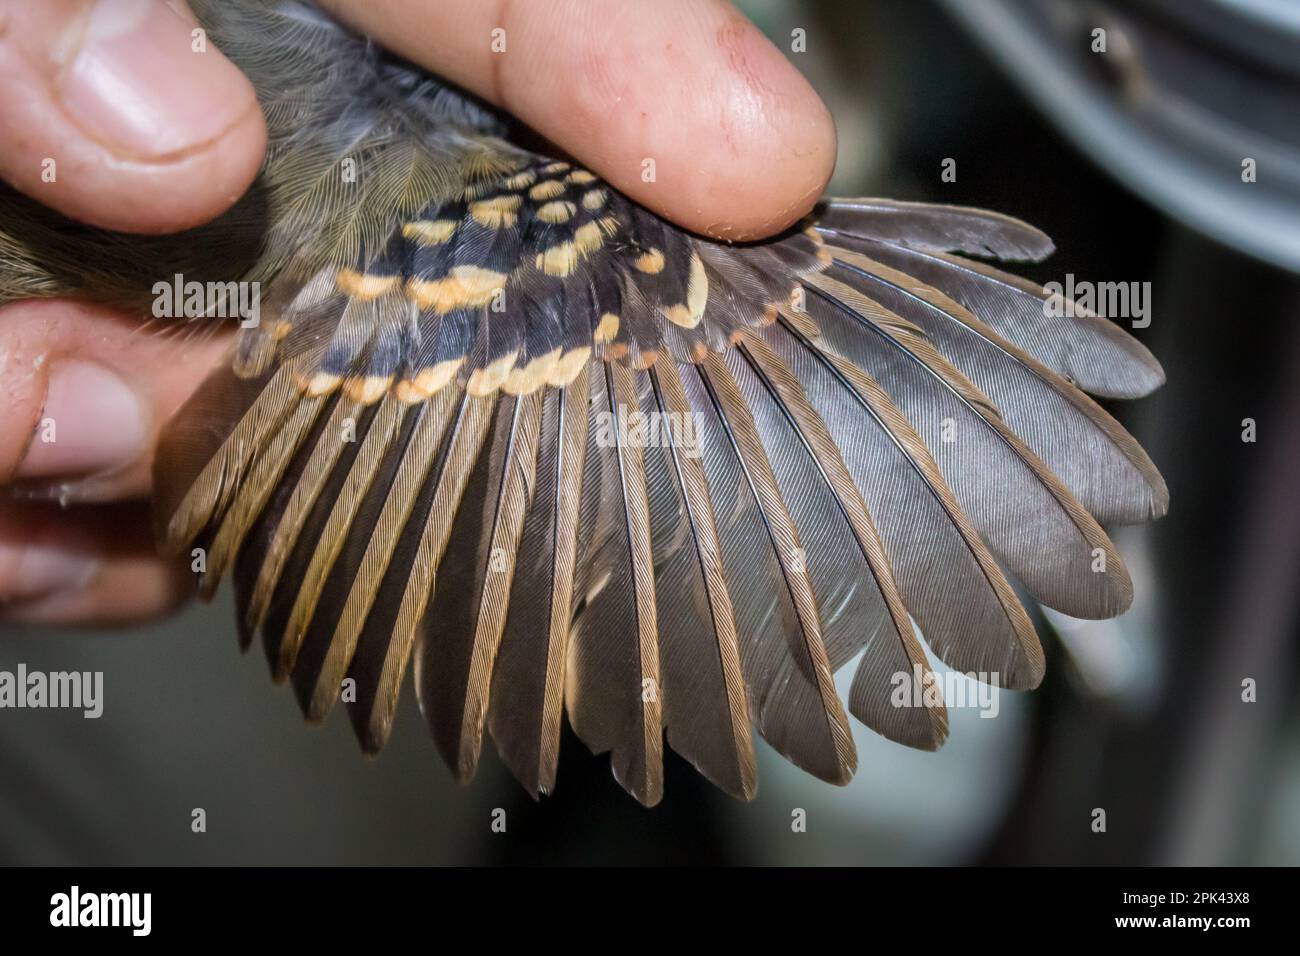 Measuring a Bird’s wing and tail which is being held in a person's hand for research, Amazon Jungle, Madre de Dios, Puerto Maldonado, Peru Stock Photo